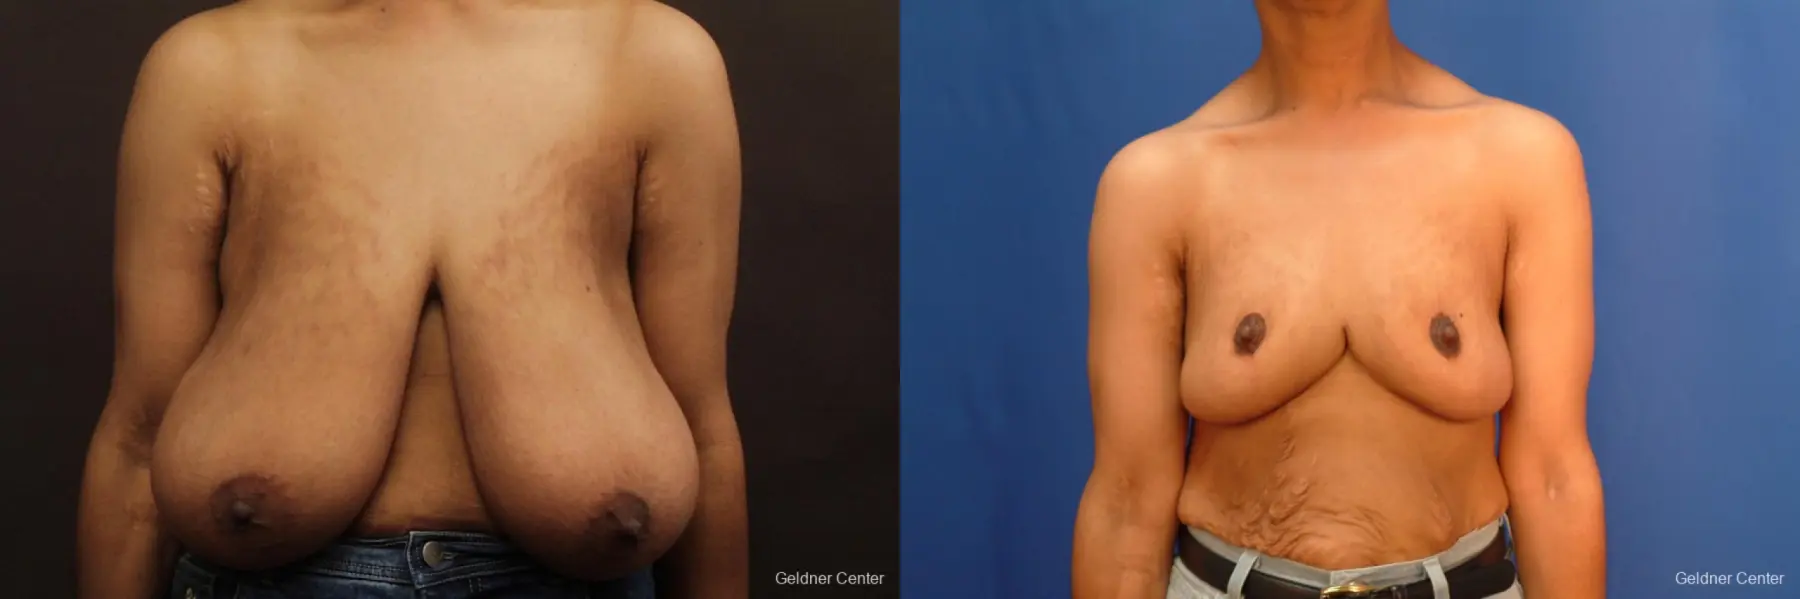 Breast Reduction Hinsdale 2440 - Before and After